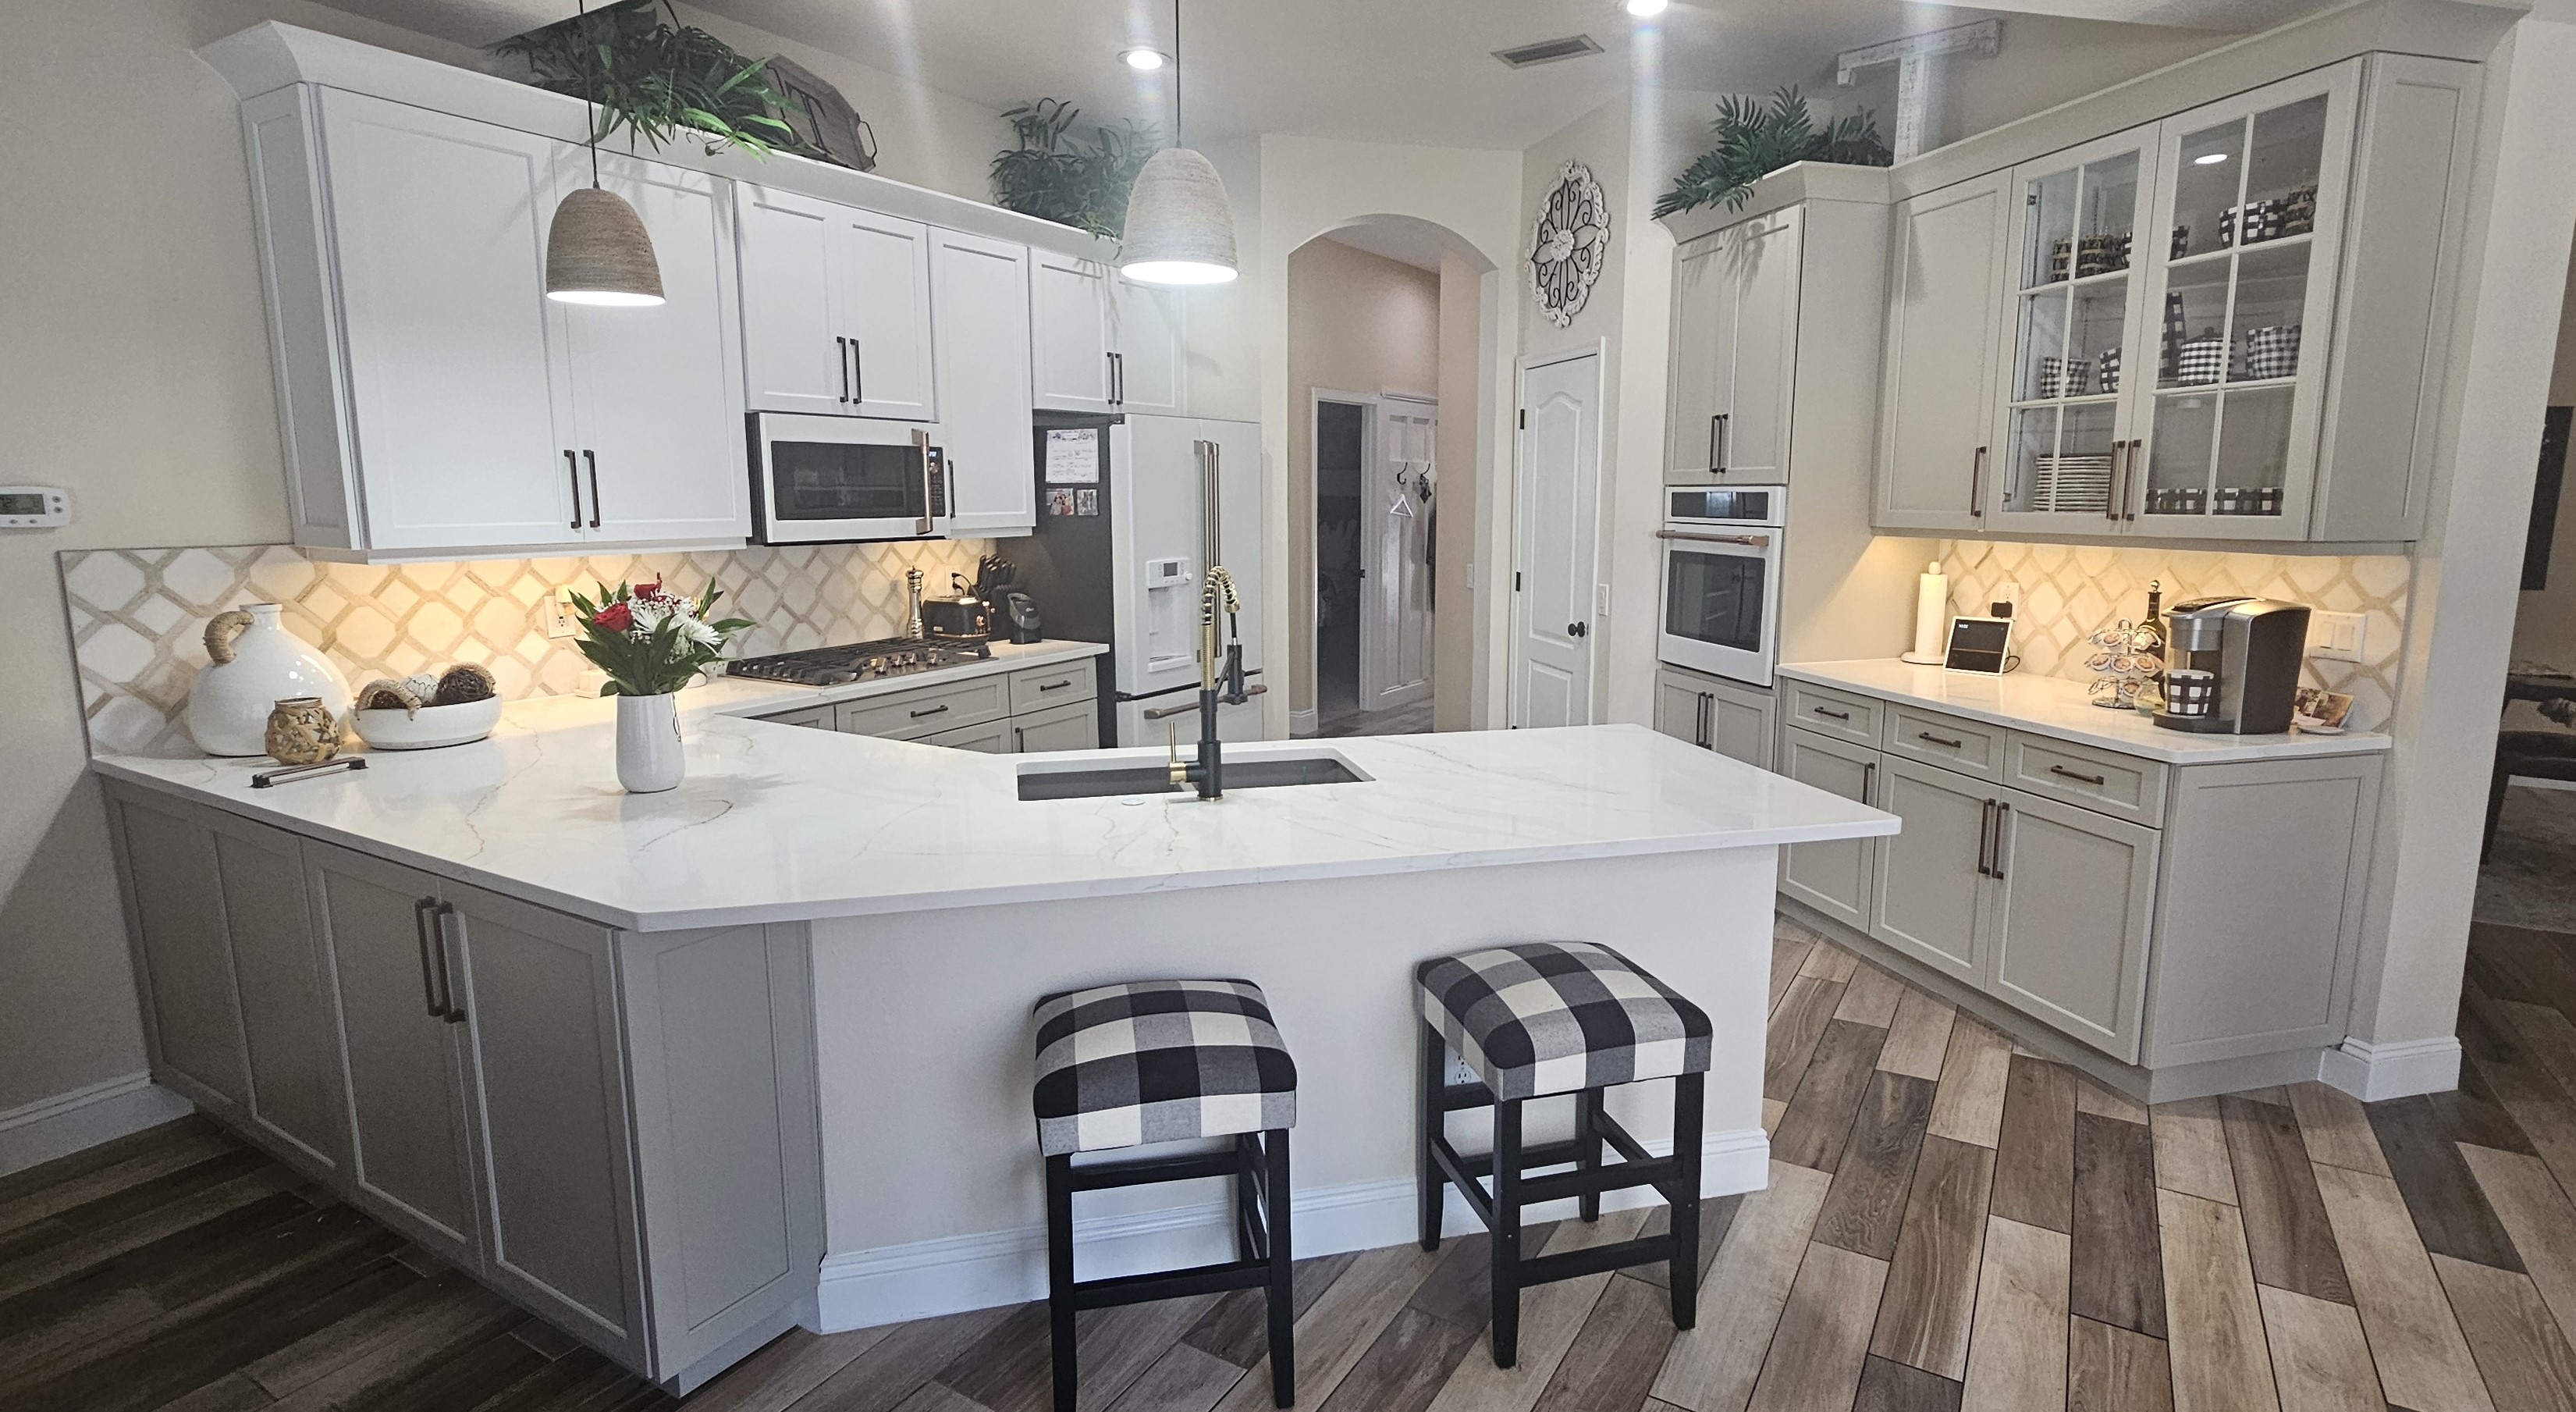 Modern appliances with a high-quality finish, granite worktops, and sleek white kitchen cabinets in Lake Magdalene.